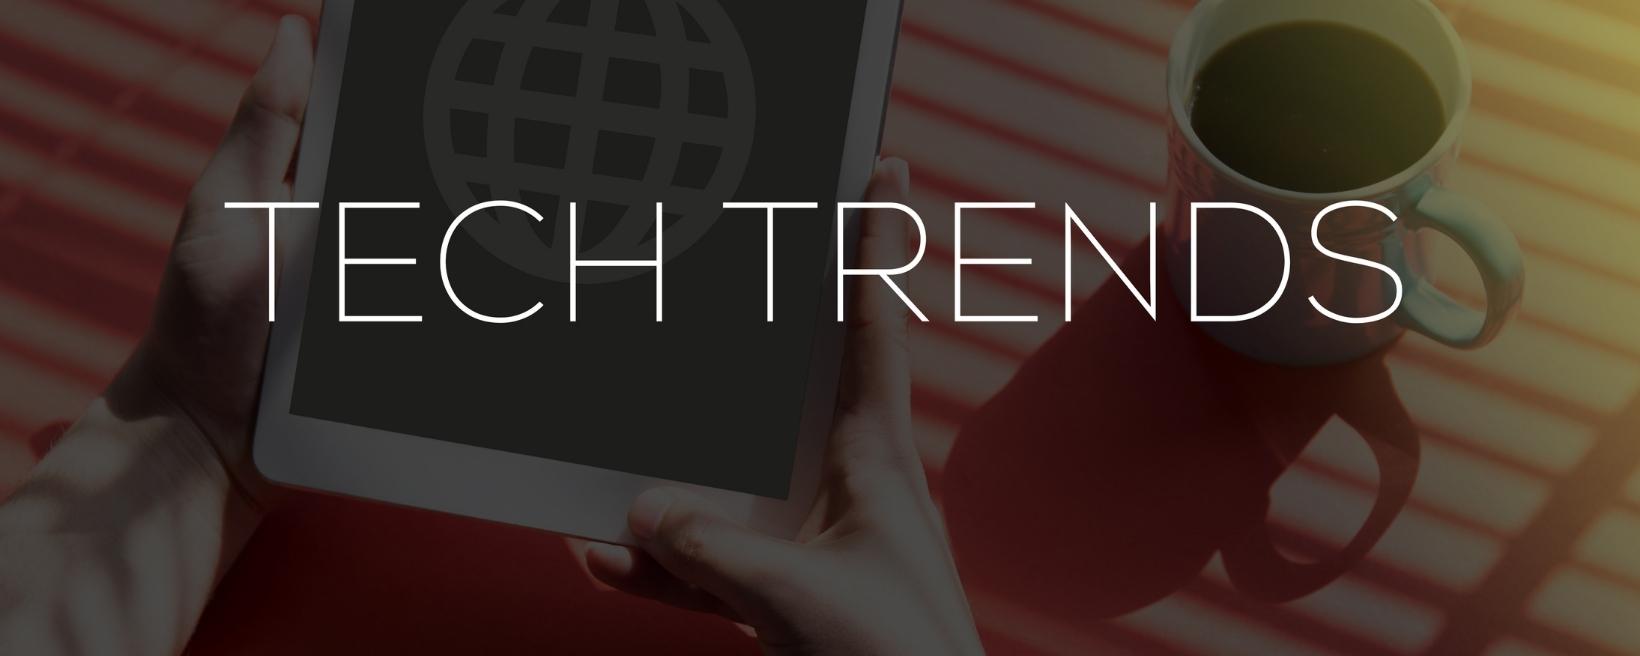 A web graphic saying "Tech Trends"